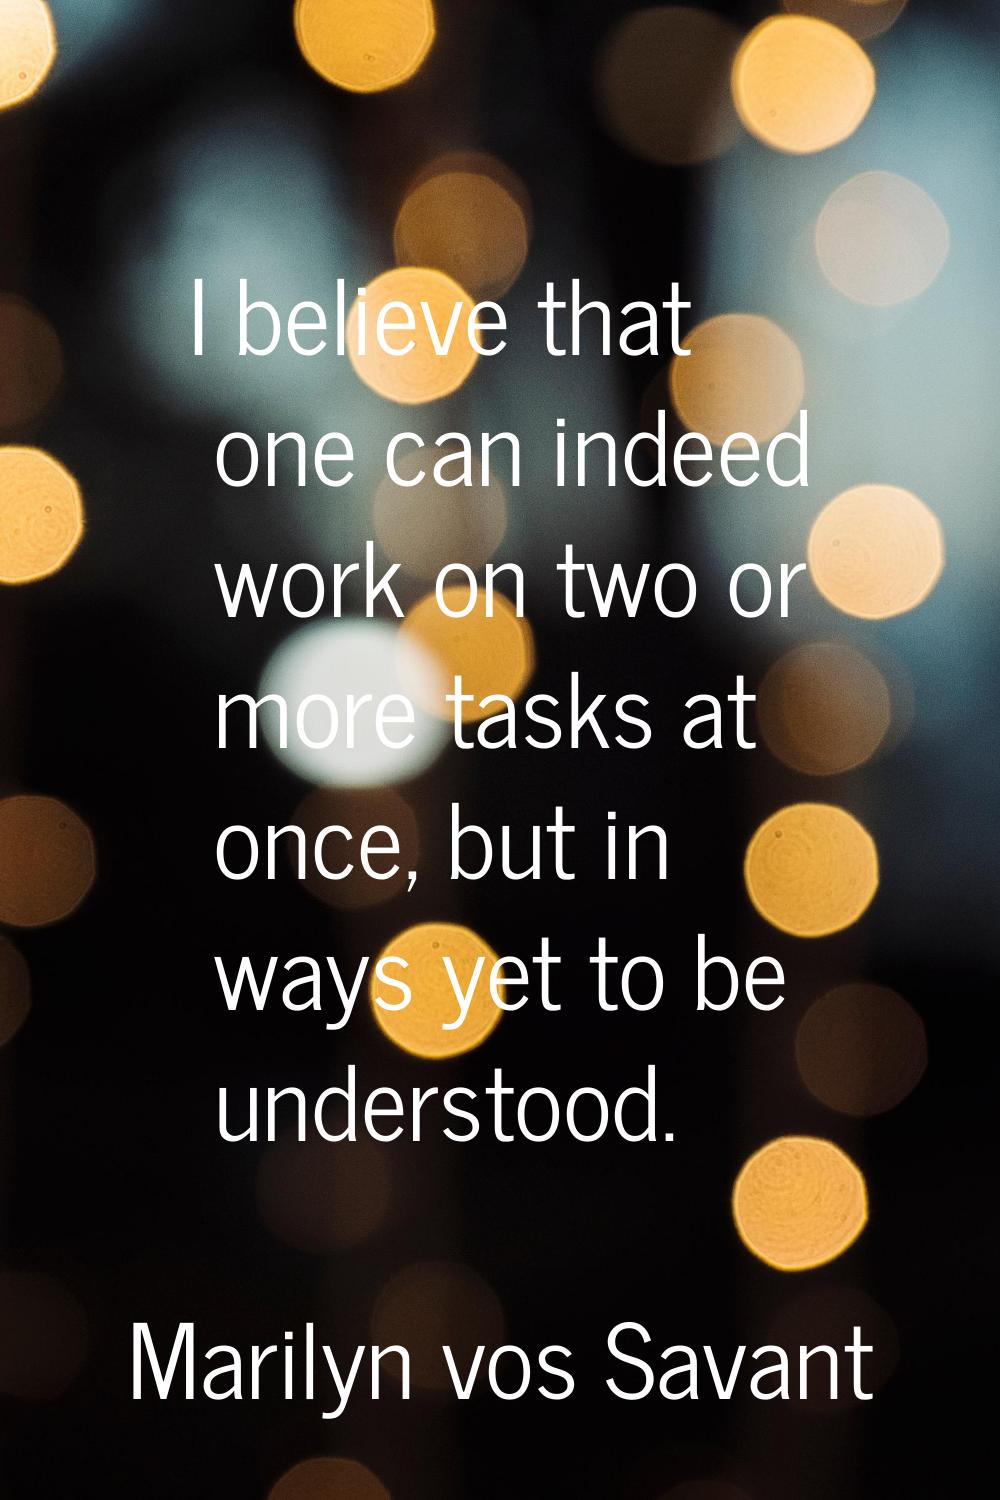 I believe that one can indeed work on two or more tasks at once, but in ways yet to be understood.